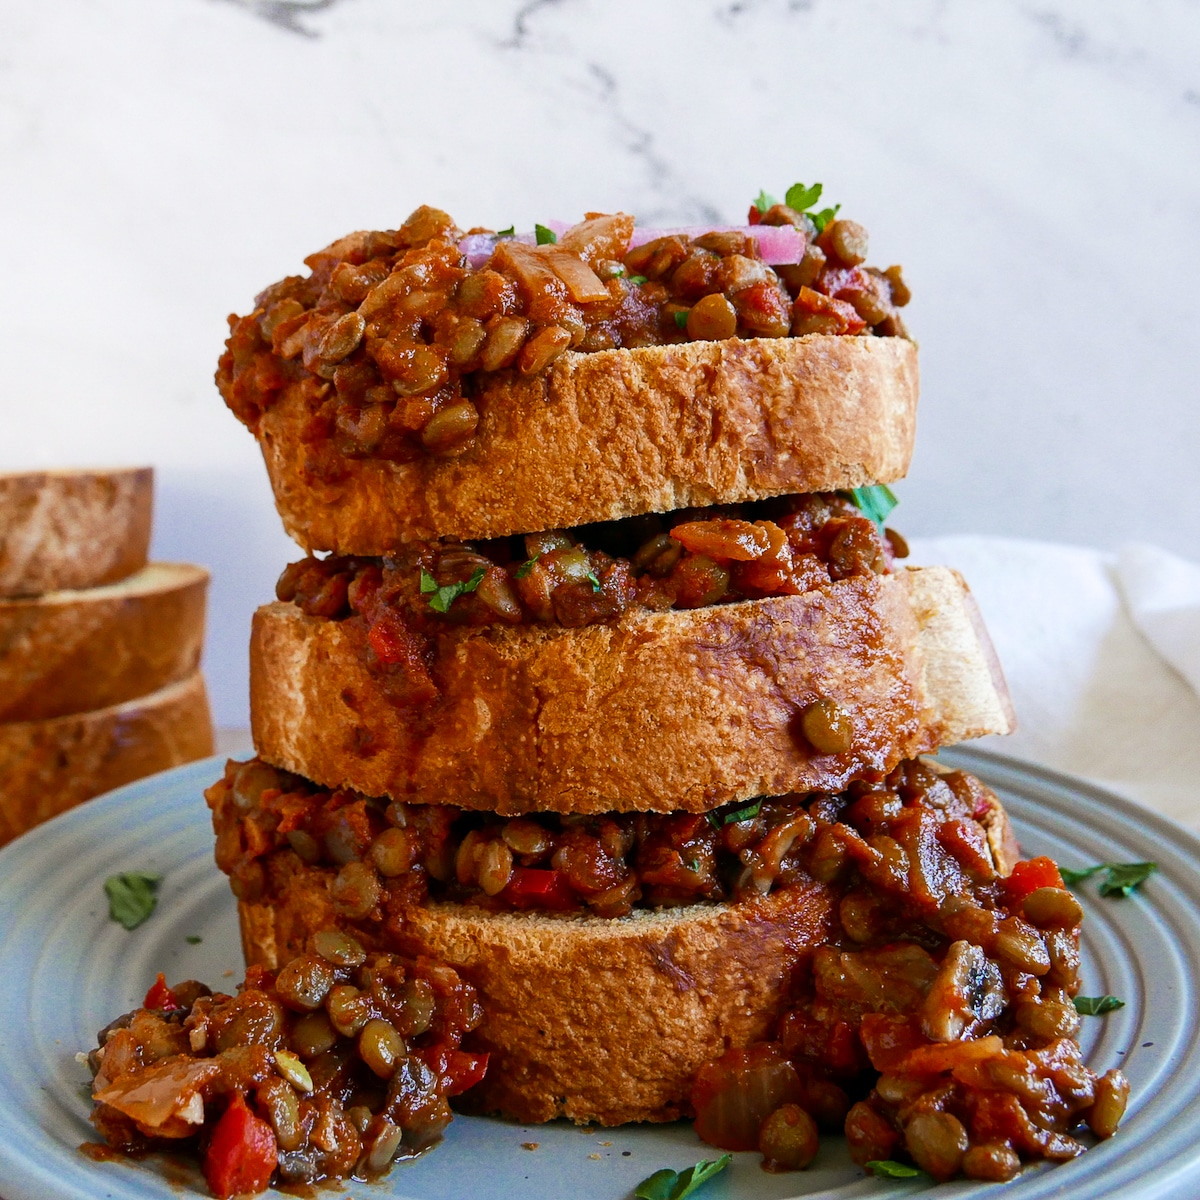 stack of 3 vegetarian sloppy joes on a gray plate.